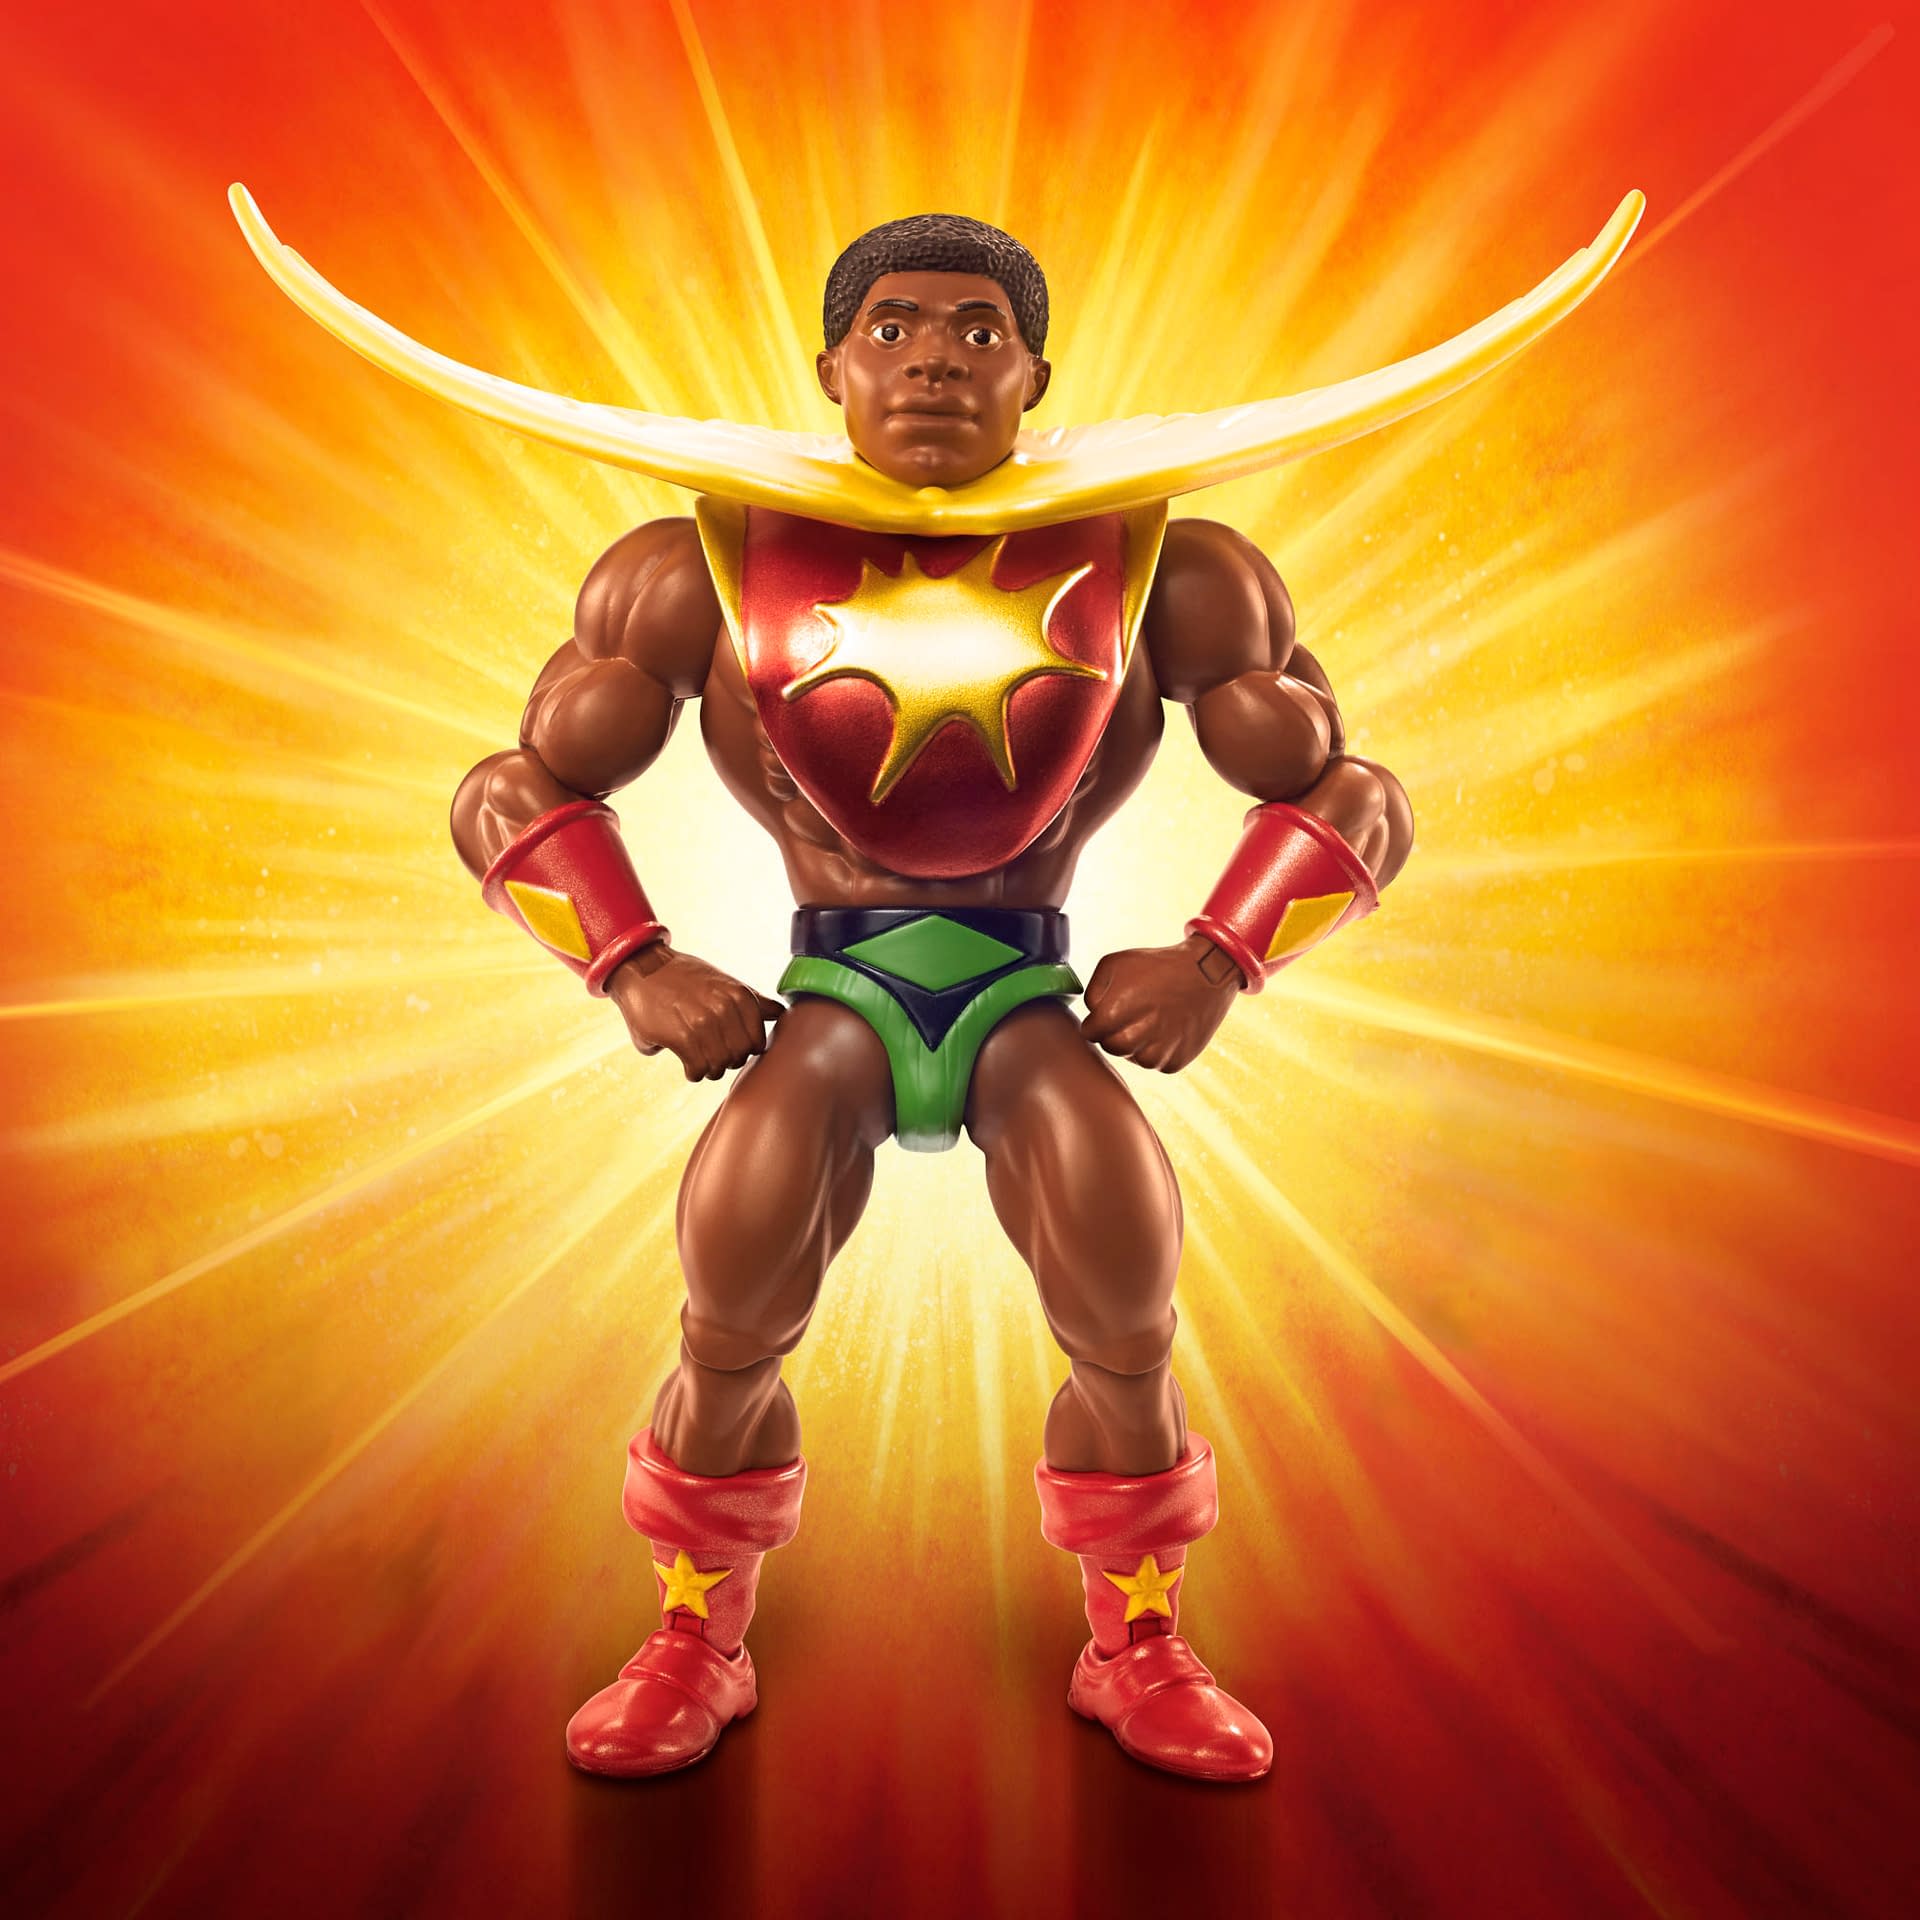 Sun-Man Joins The Masters Of The Universe, Figure On Sale Monday